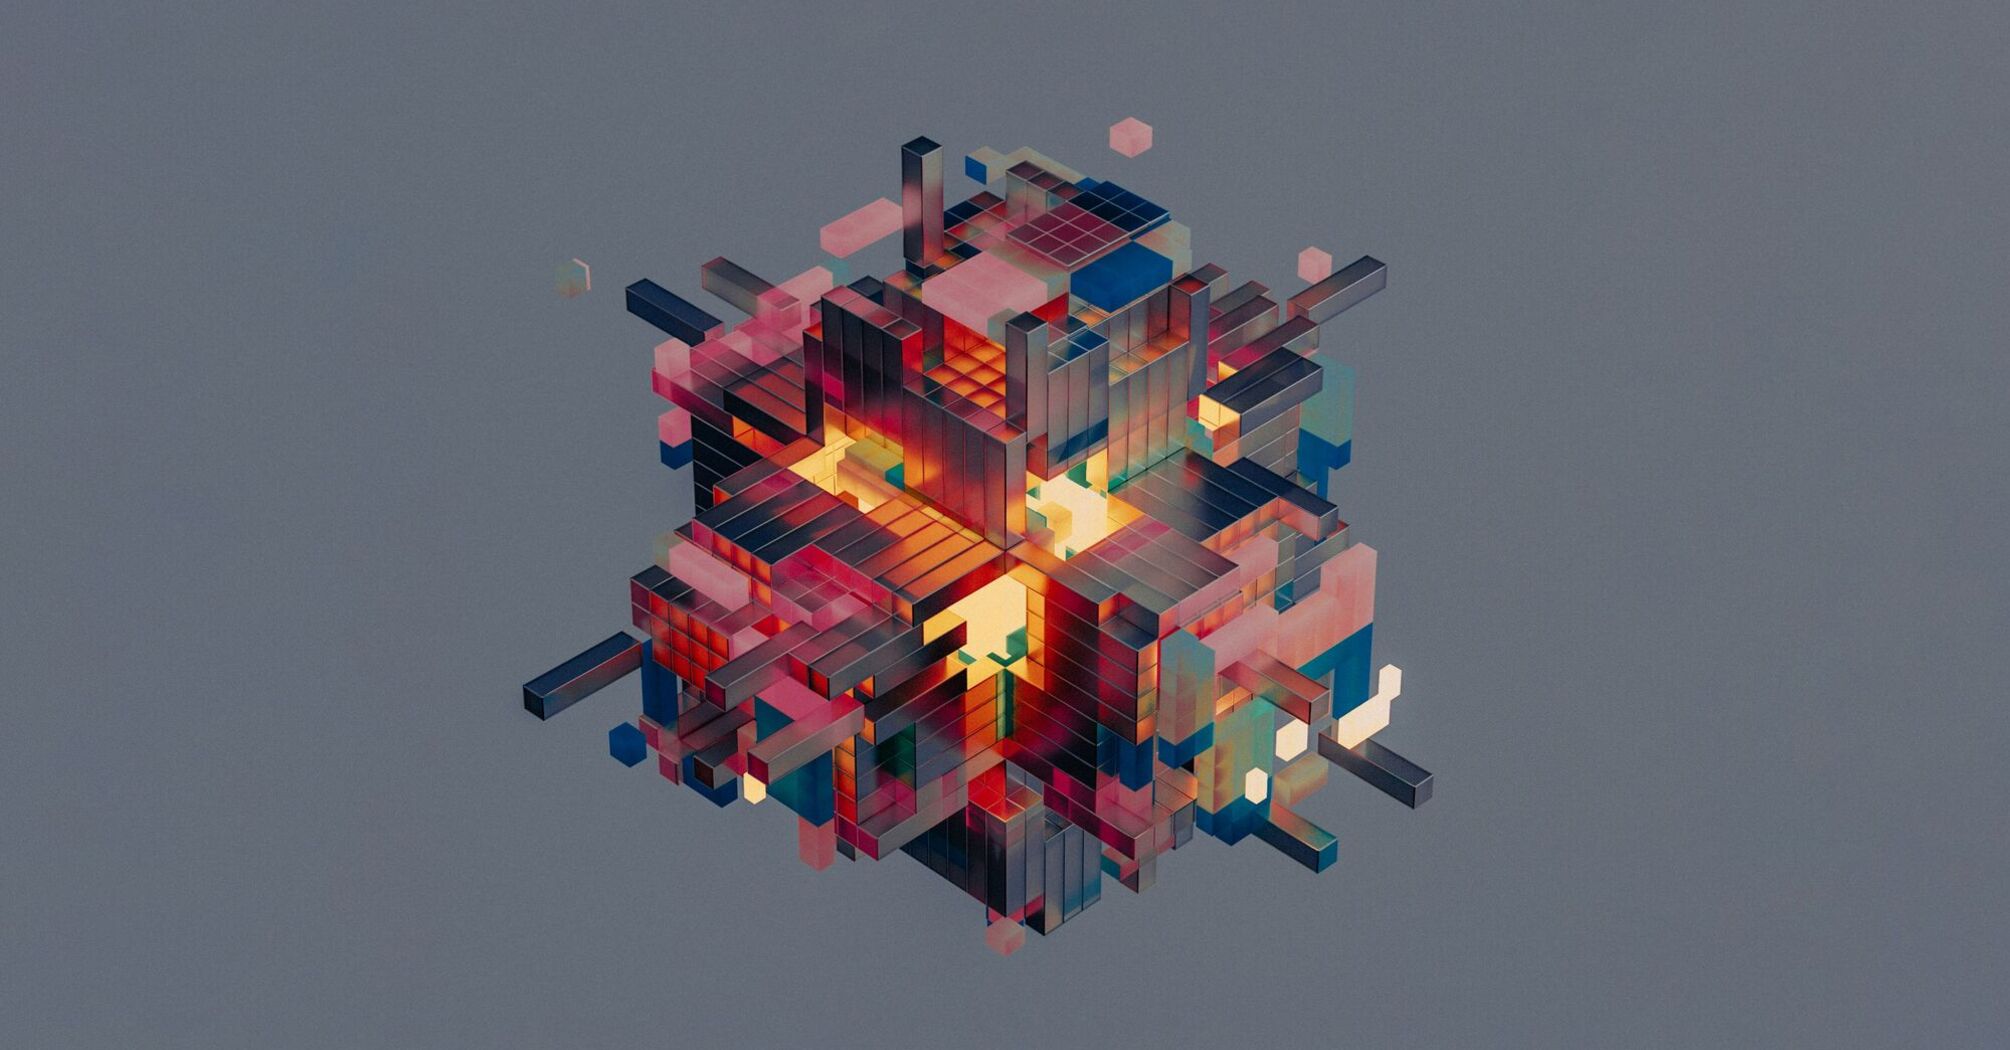 Abstract digital artwork of a complex, multicolored cubic structure with a glow at its core, set against a neutral background